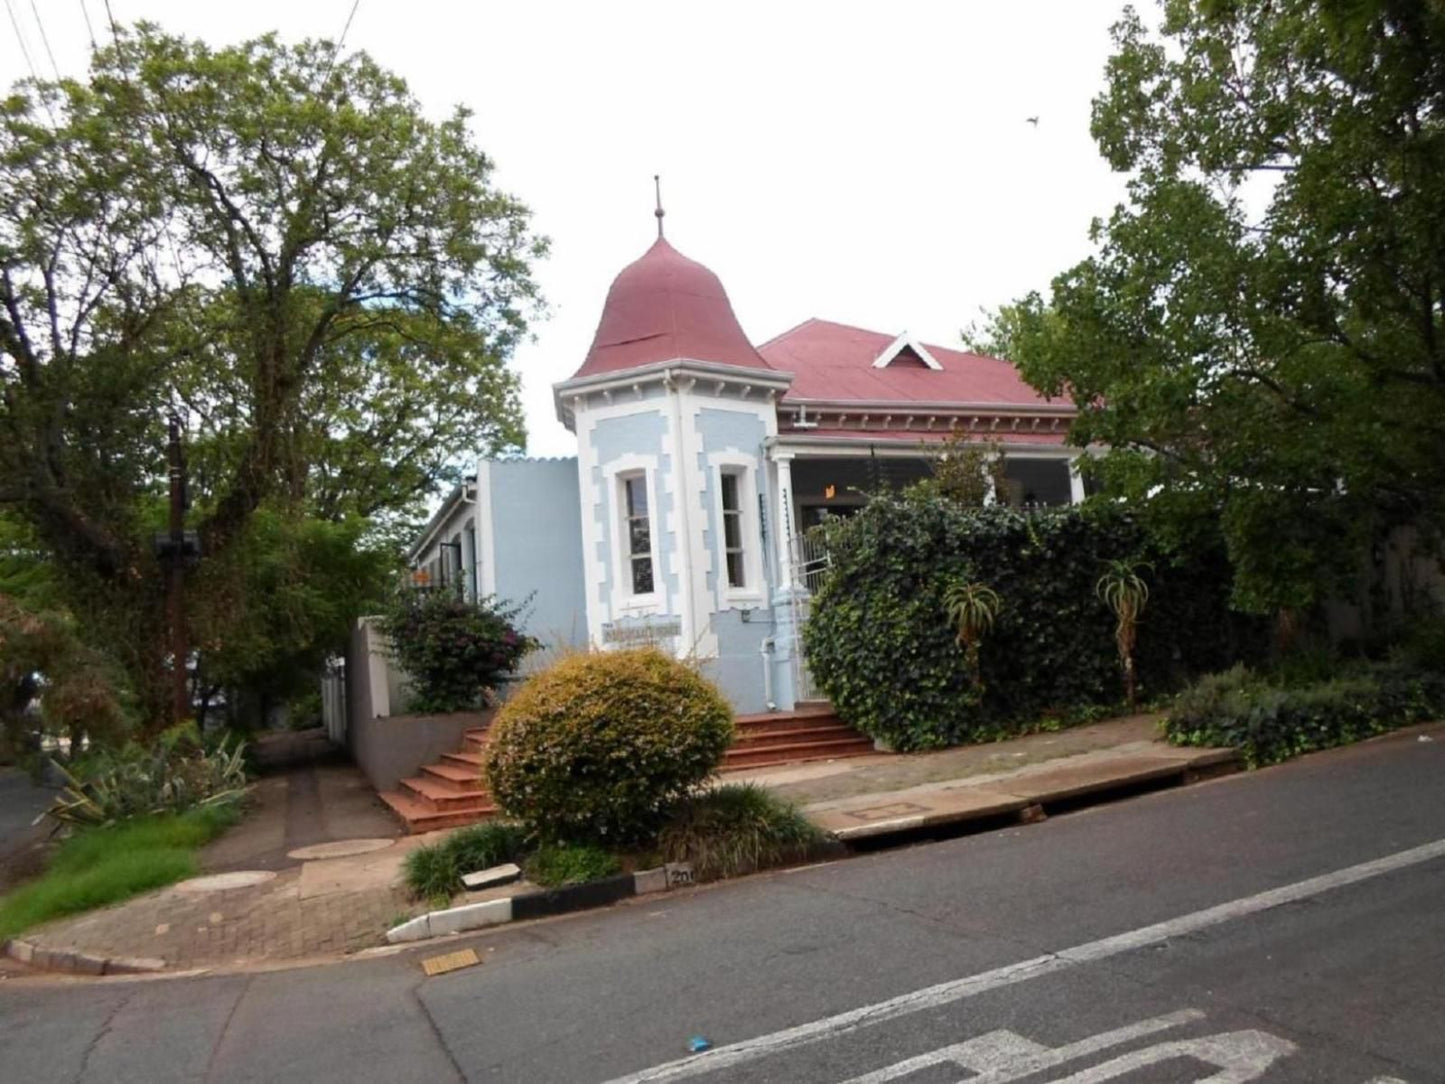 Melville Turret Guesthouse Melville Johannesburg Gauteng South Africa Building, Architecture, House